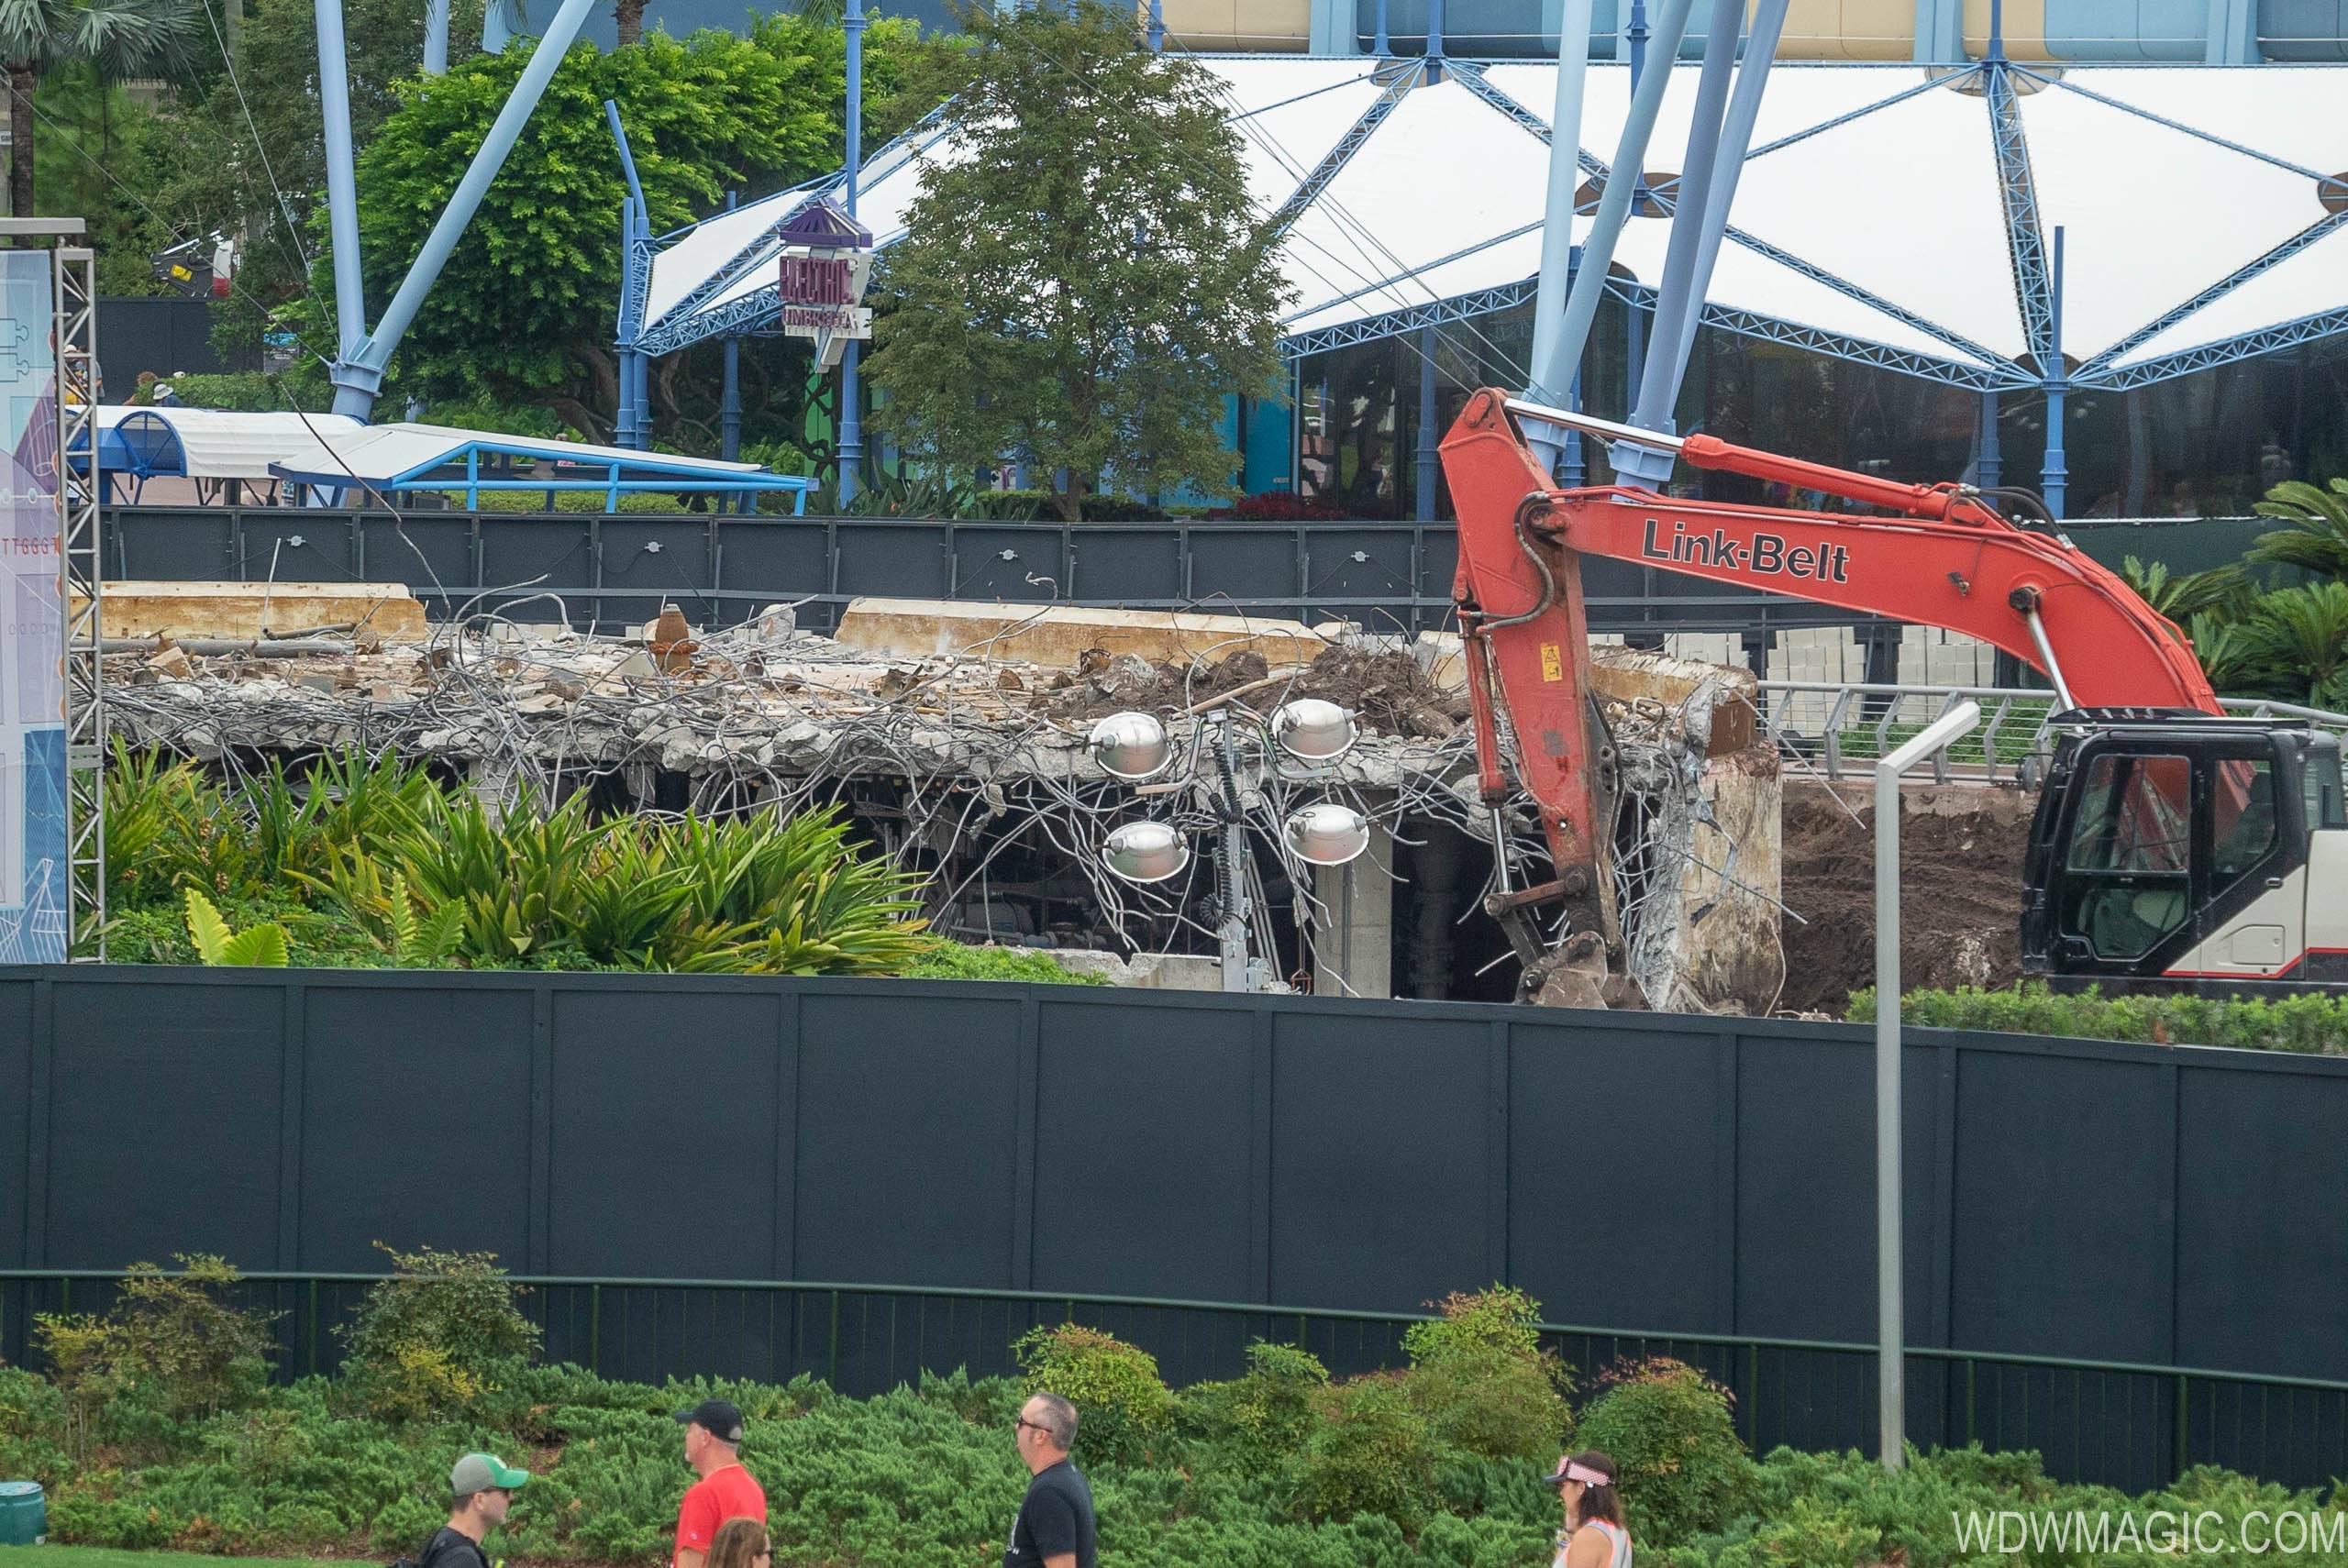 PHOTOS - Fountain of Nations demolition